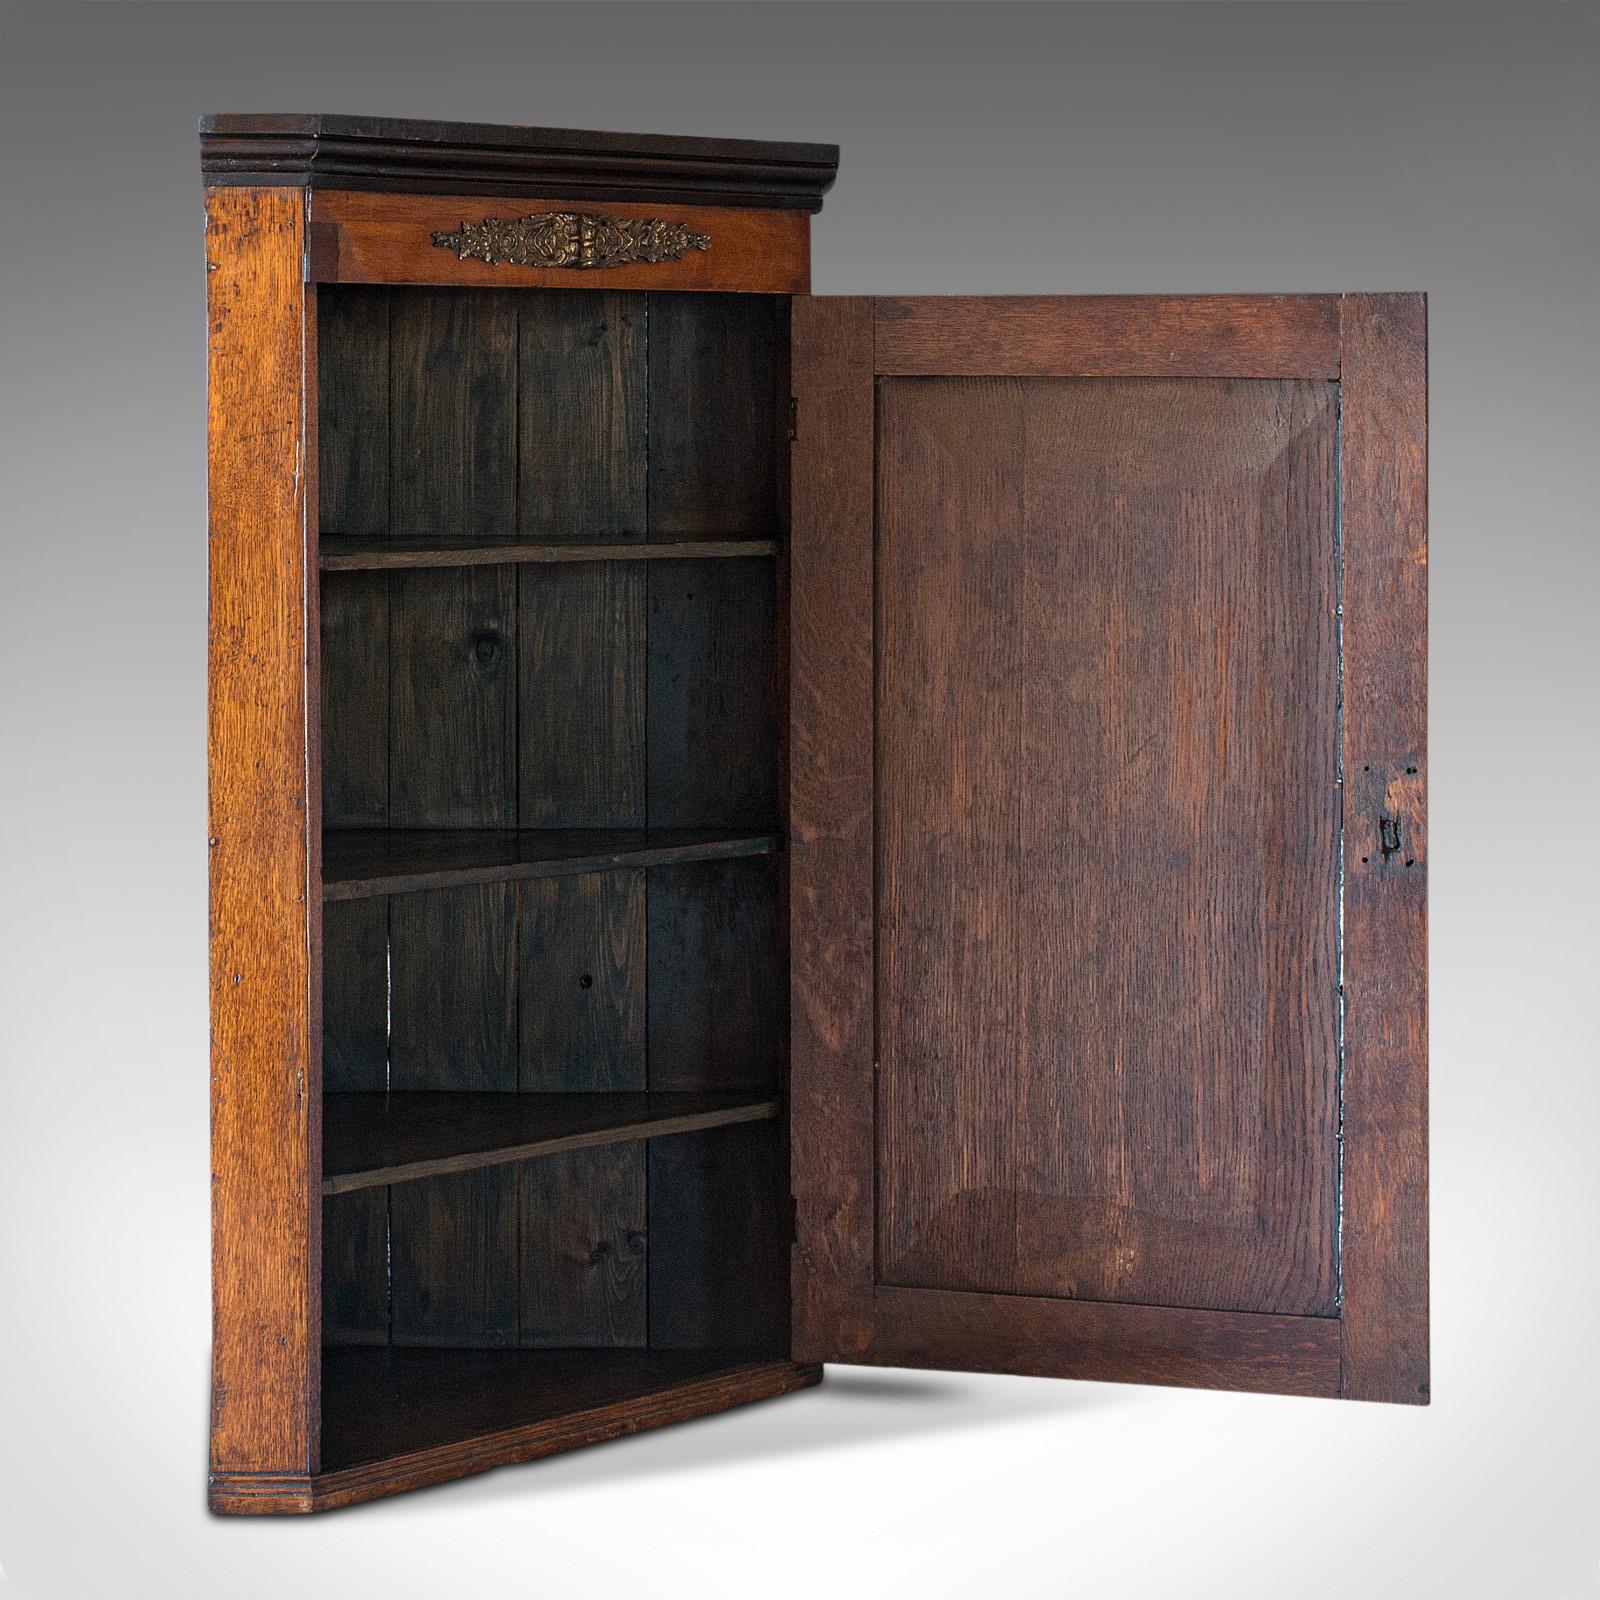 This is an antique corner cabinet. An English, oak and mahogany Georgian hanging cupboard, dating to the late 18th century, circa 1800.

Rich colour and grain interest abound
Displays a desirable aged patina
Shows fine grain interest and wisps